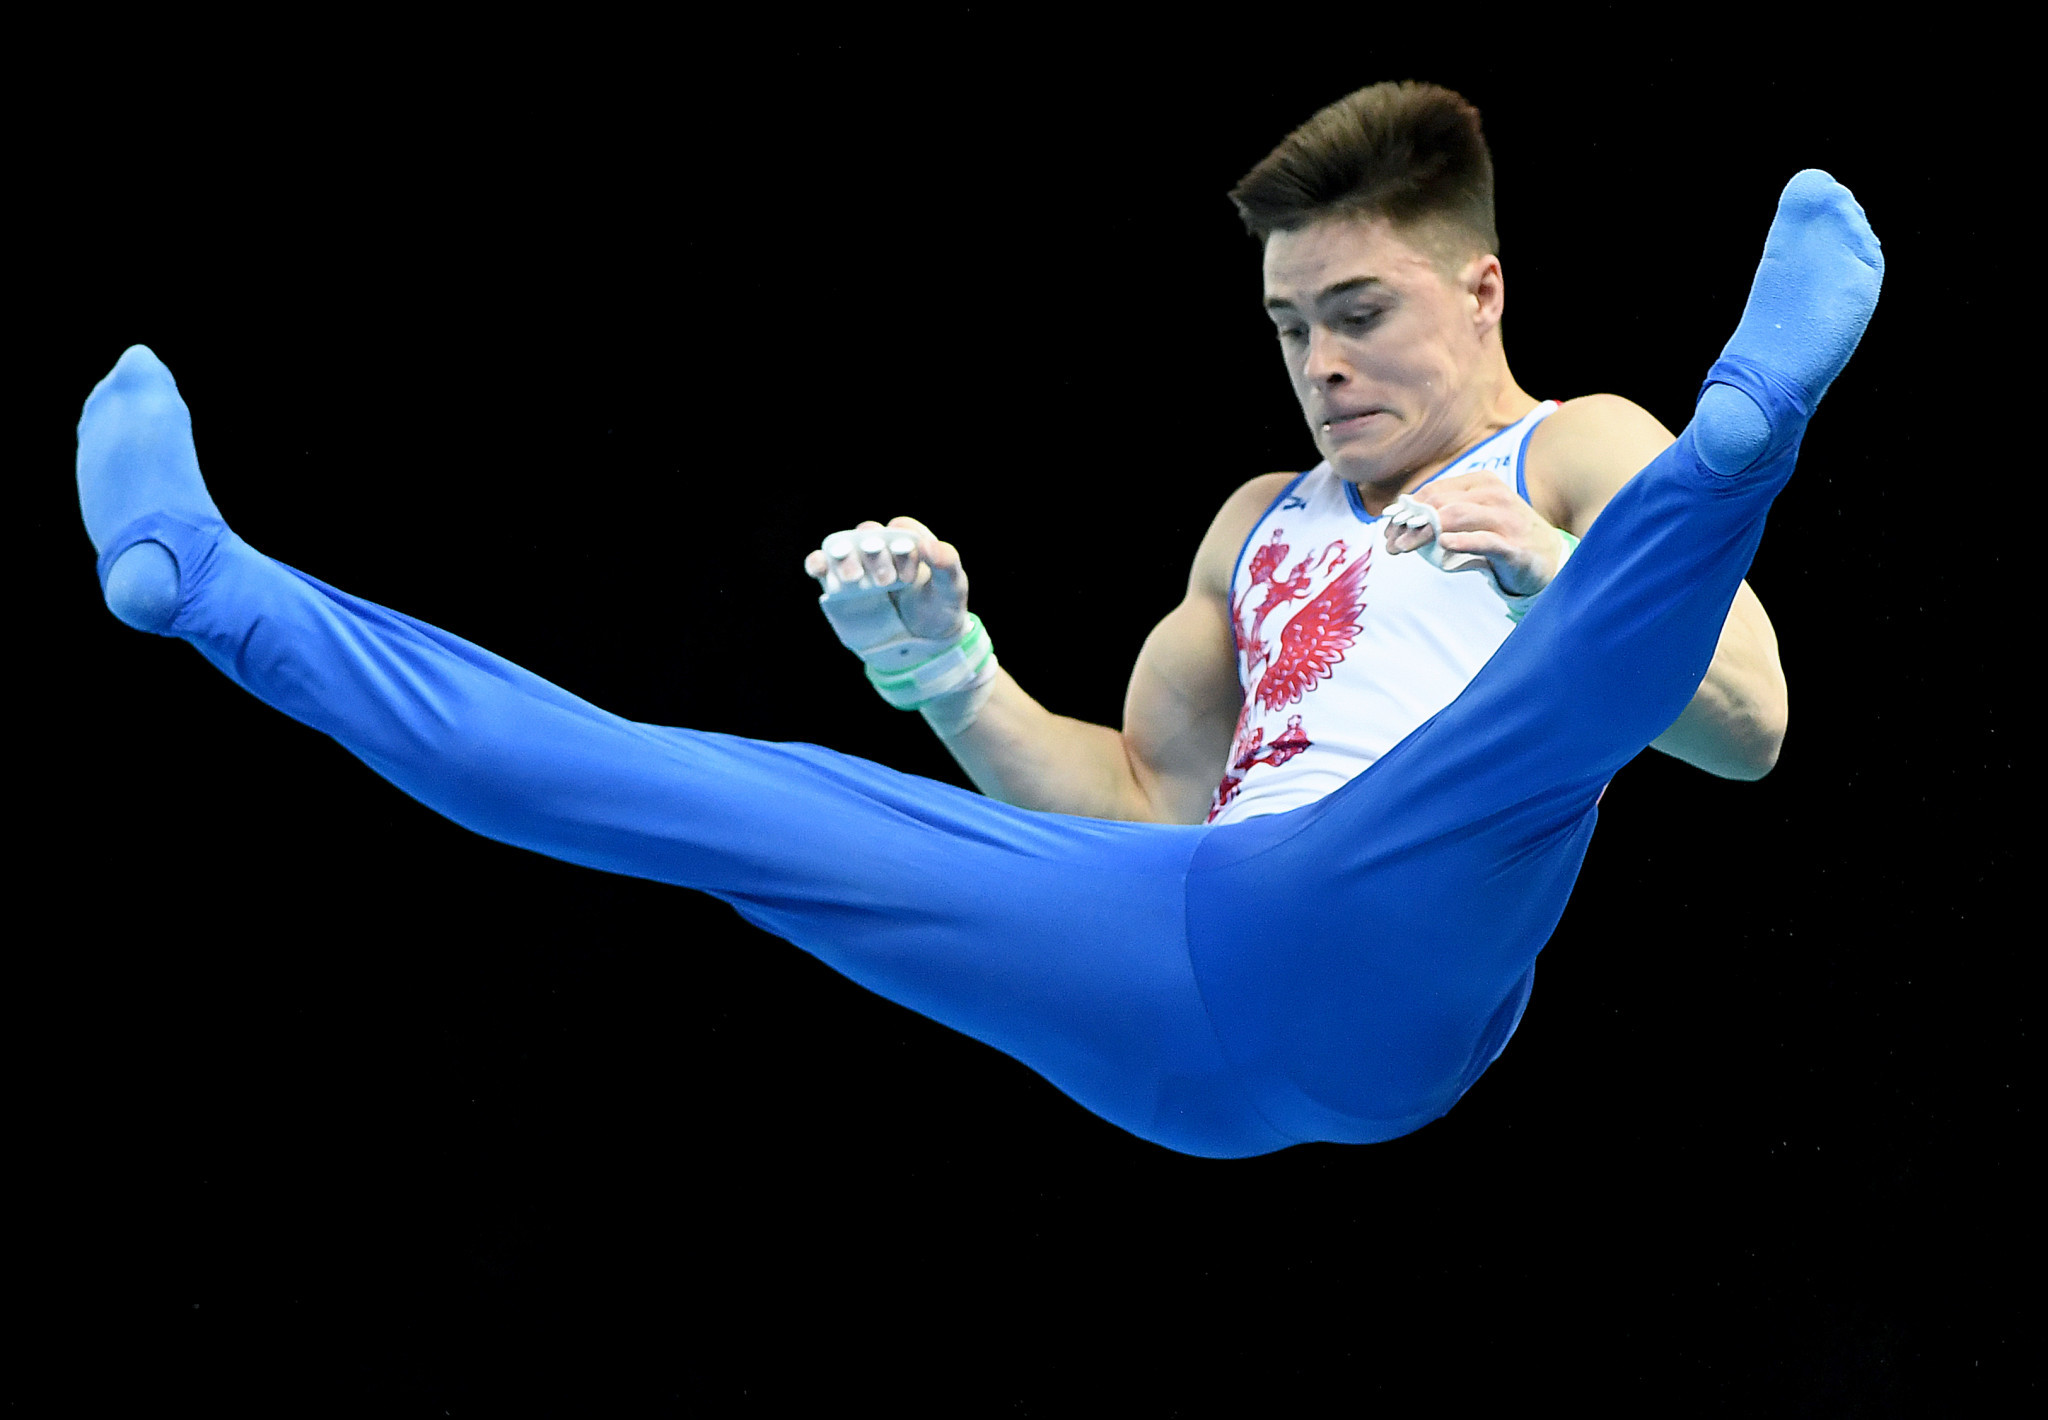 Russia's Nikita Nagornyy won two golds at the European Artistic Gymnastics Individual Championships ©Getty Images